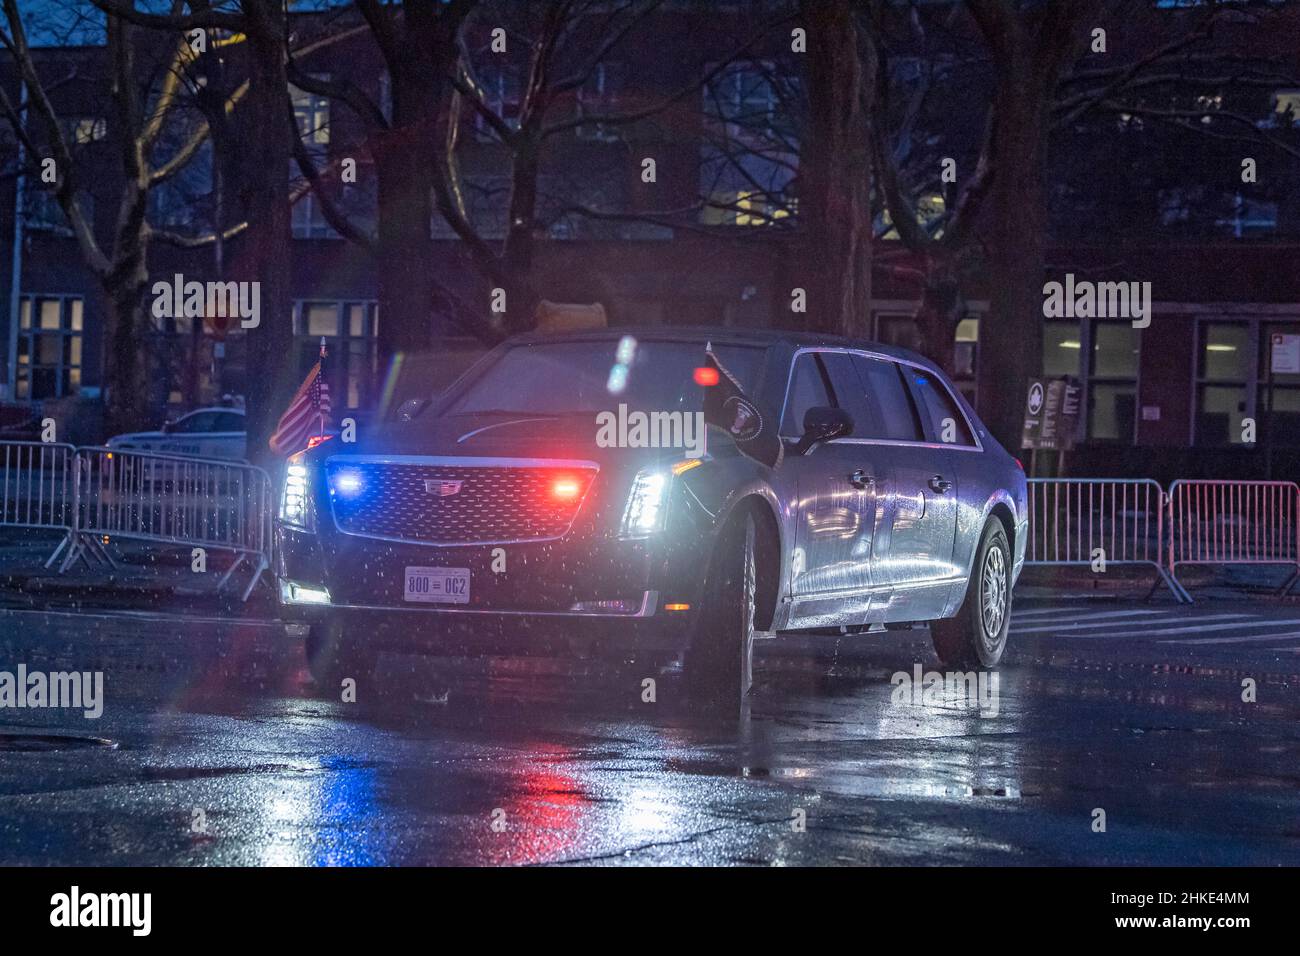 New York, United States. 03rd Feb, 2022. NEW YORK, NEW YORK - FEBRUARY 03: President Biden's motorcade departs from Long Island City on February 3, 2022 in Queens Borough of New York City. U.S. President Joe Biden visits New York public school P.S. 111 Jacob Blackwell to discuss community violence intervention programs with local leaders in Queens. Credit: Ron Adar/Alamy Live News Stock Photo